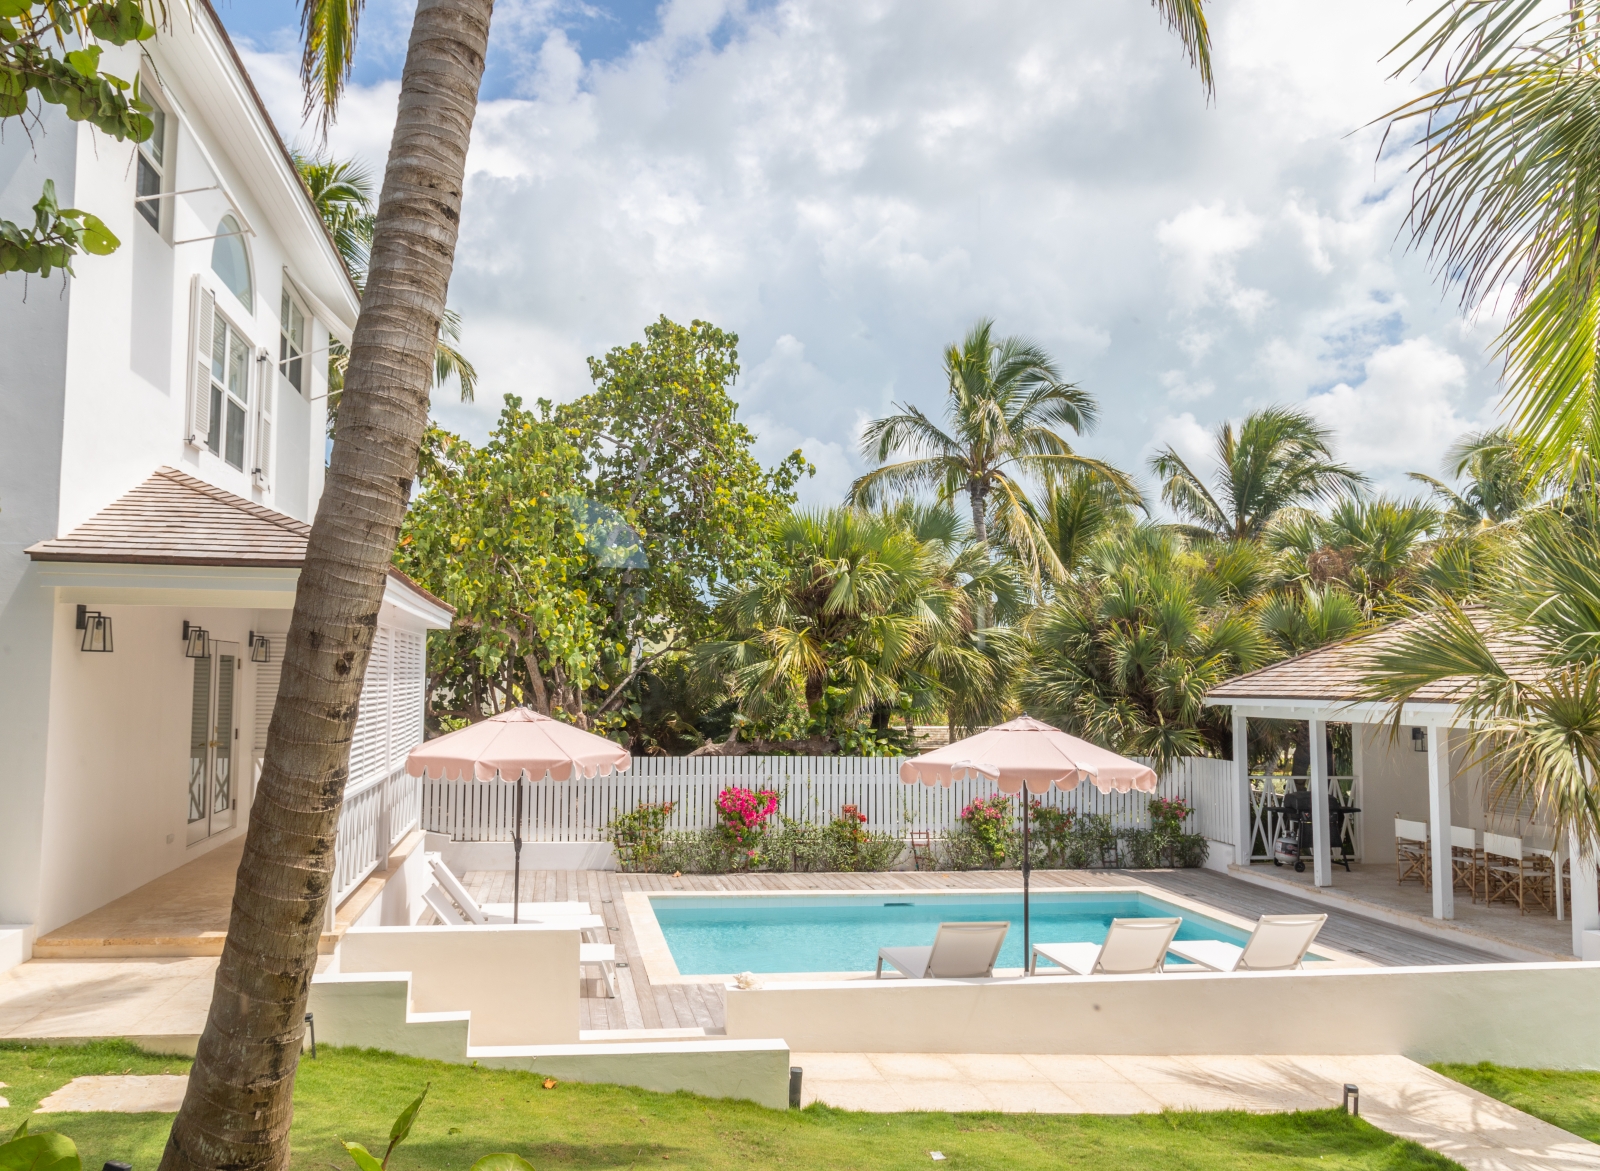 Garden with pool, sun loungers, umbrellas and pool house at Sea Siren in the Bahamas, Caribbean